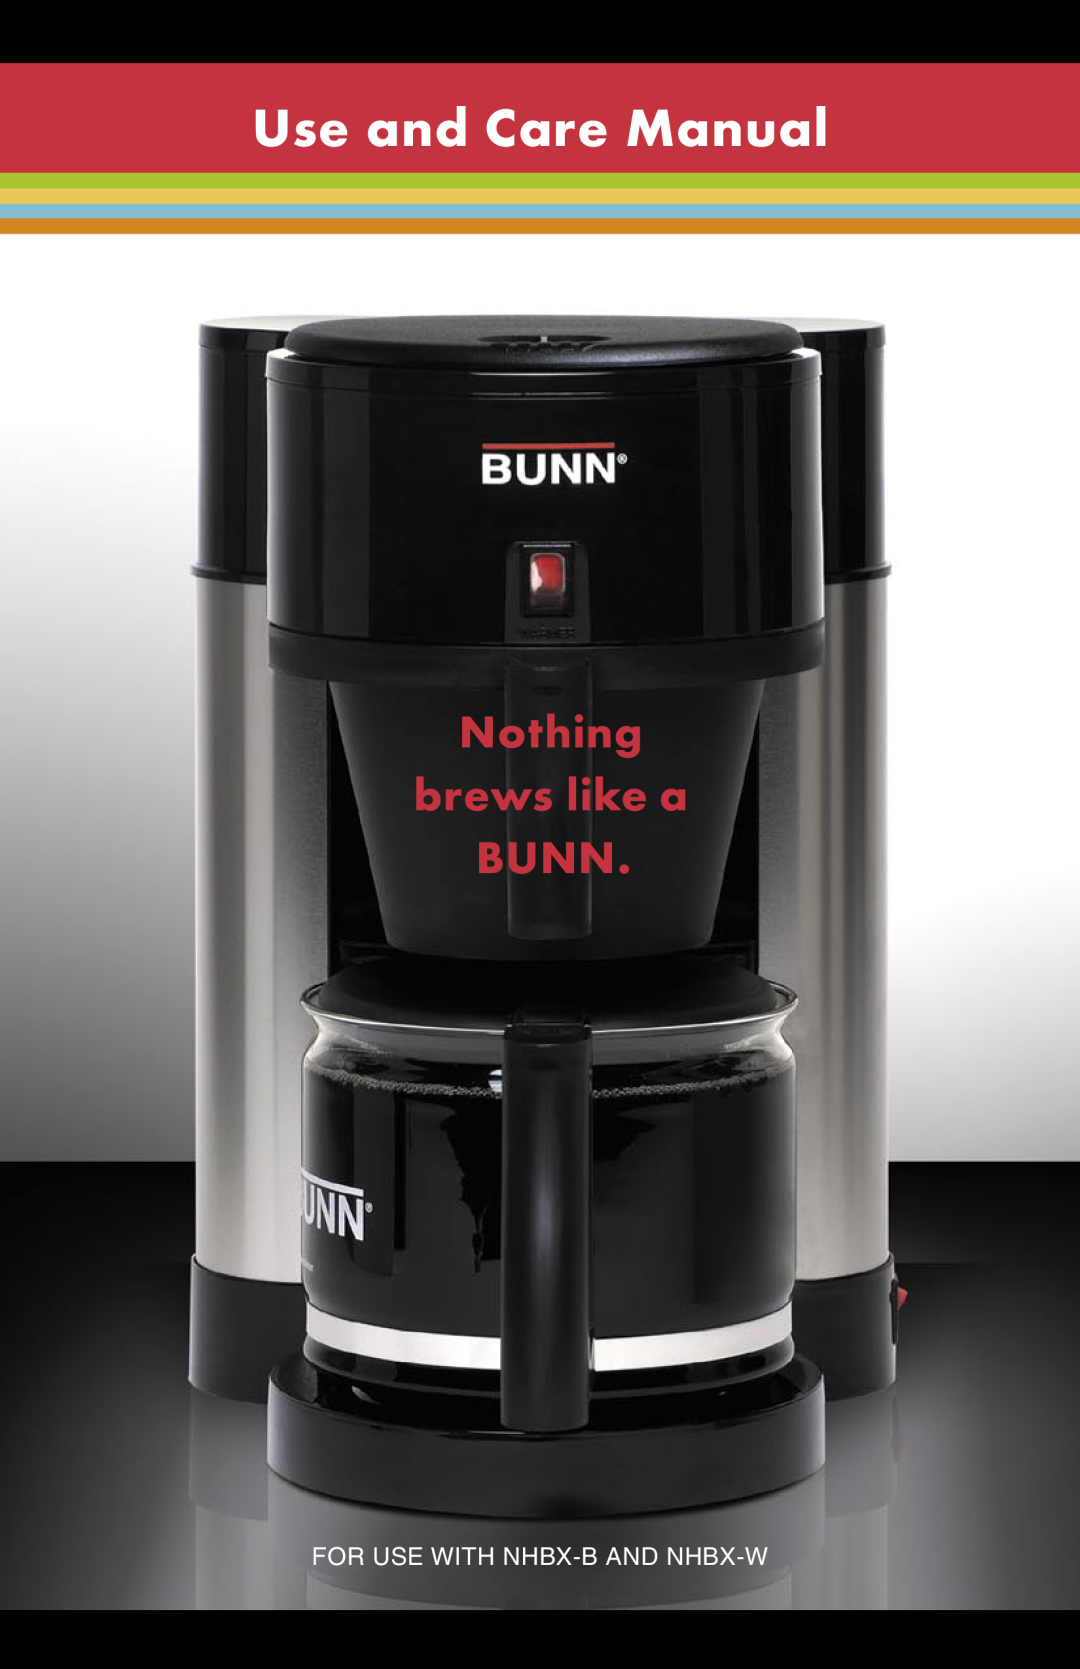 Bunn manual Use and Care Manual, Brew Better. Not Bitter, FOR USE WITH STX, NHBX-B and NHBX-W 